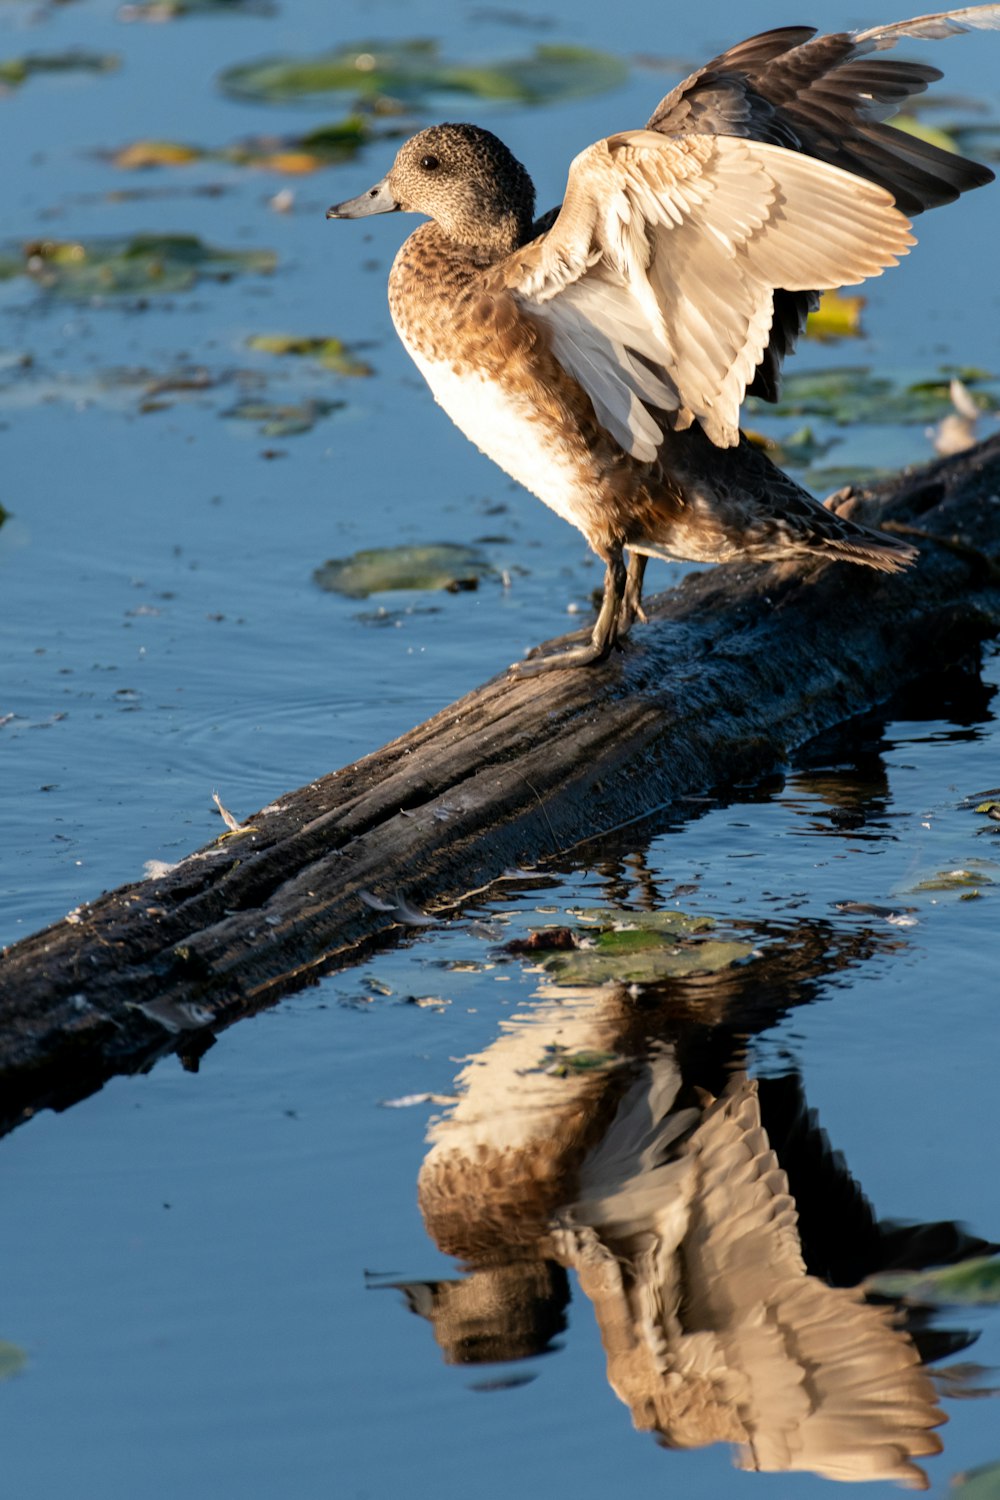 brown duck on tree trunk floating on calm body of water